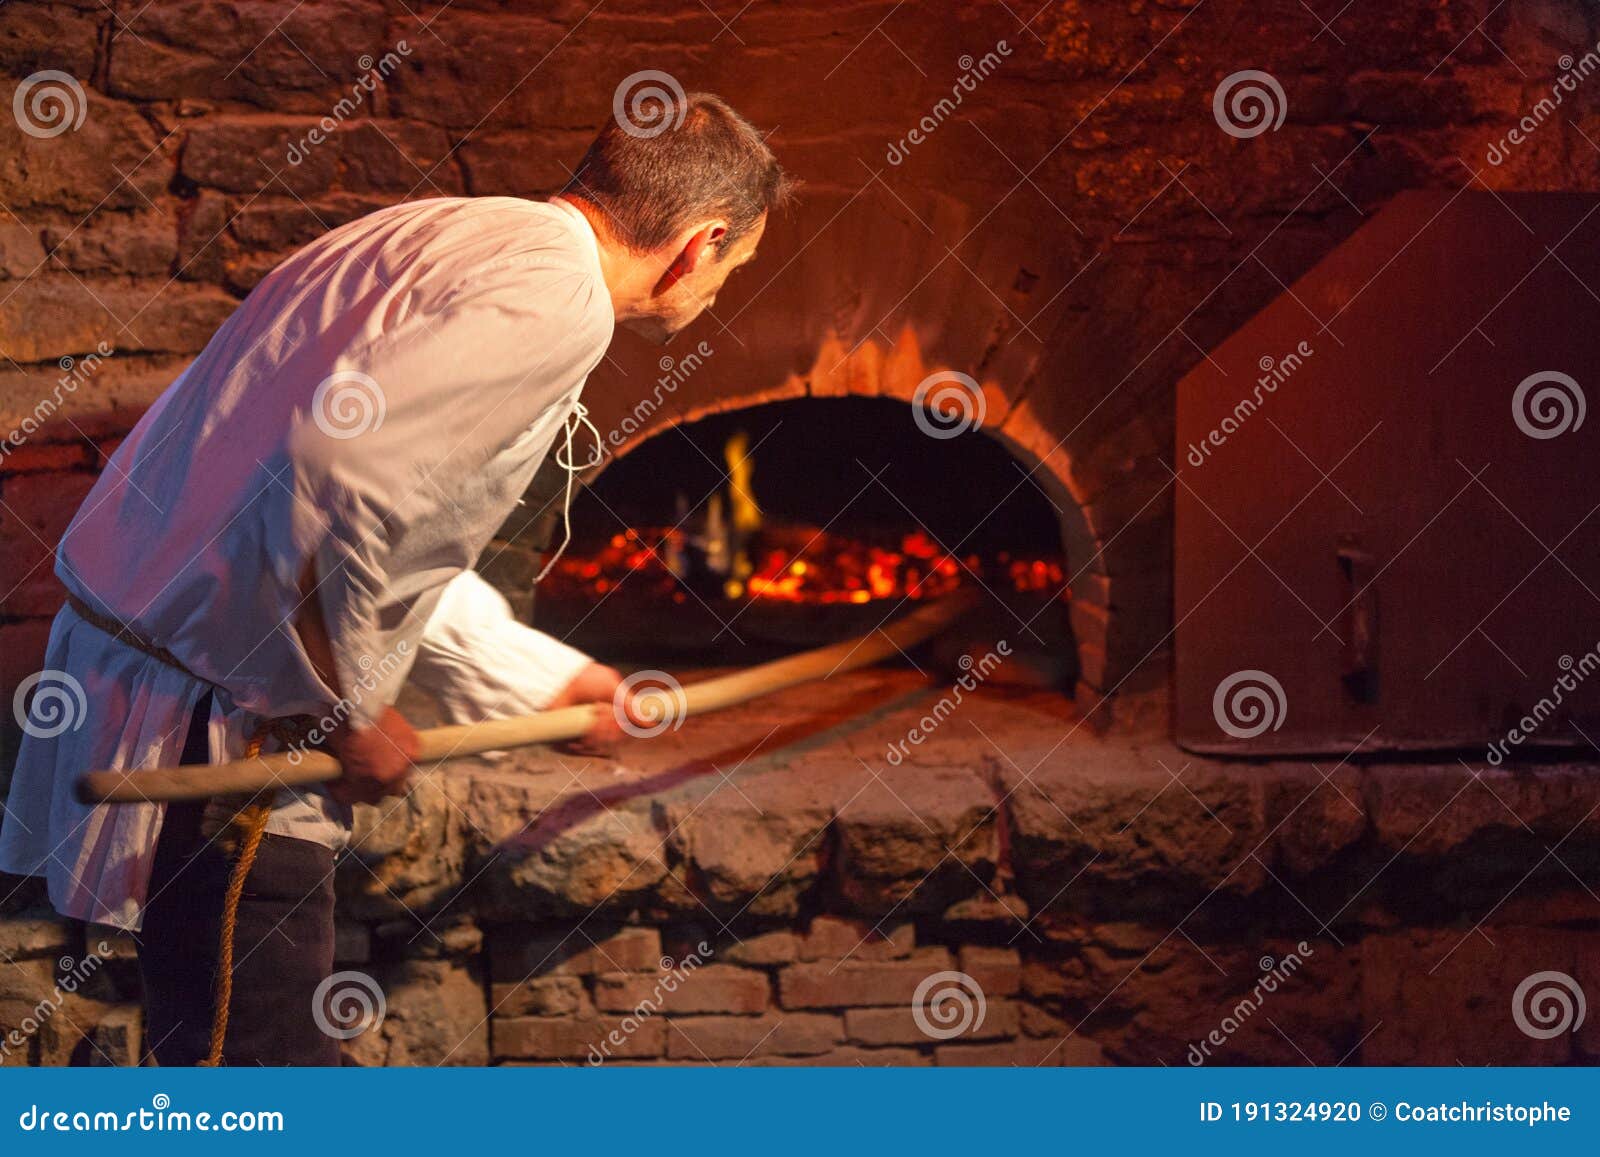 Medieval Baker Baking the Fouaces Editorial Image - Image of nocturnes